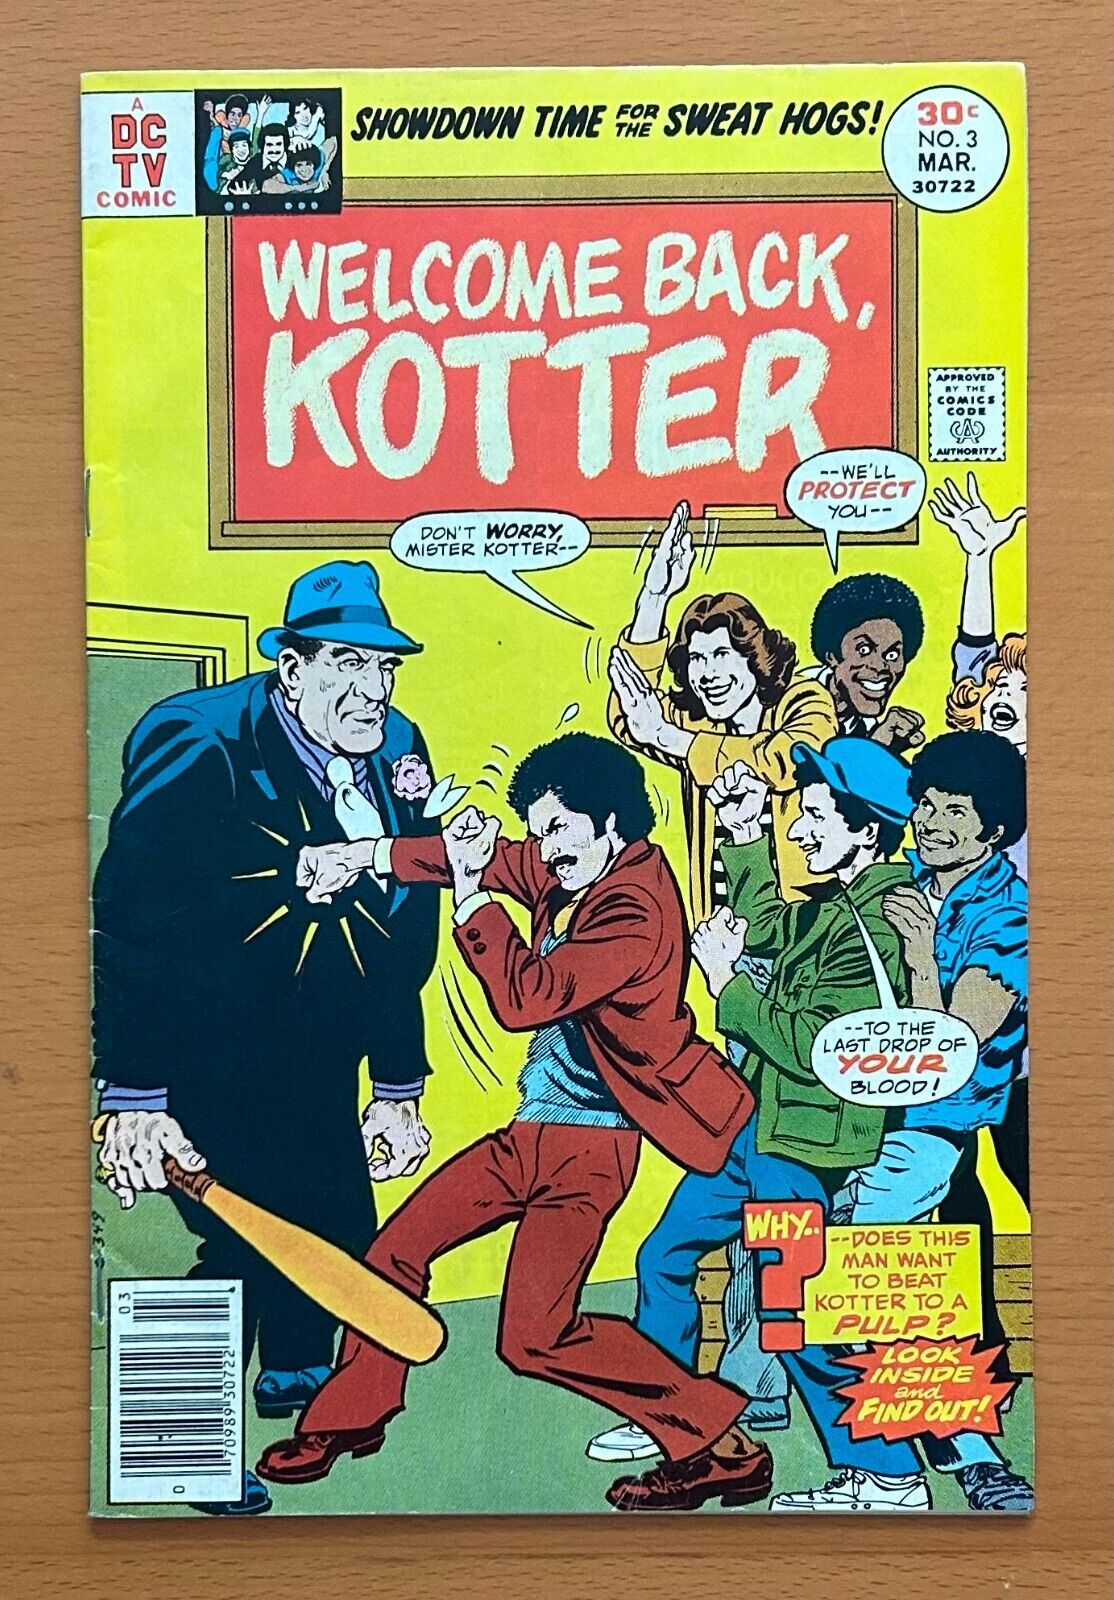 Welcome Back Kotter #3 (DC TV 1977) FN/VF condition comic